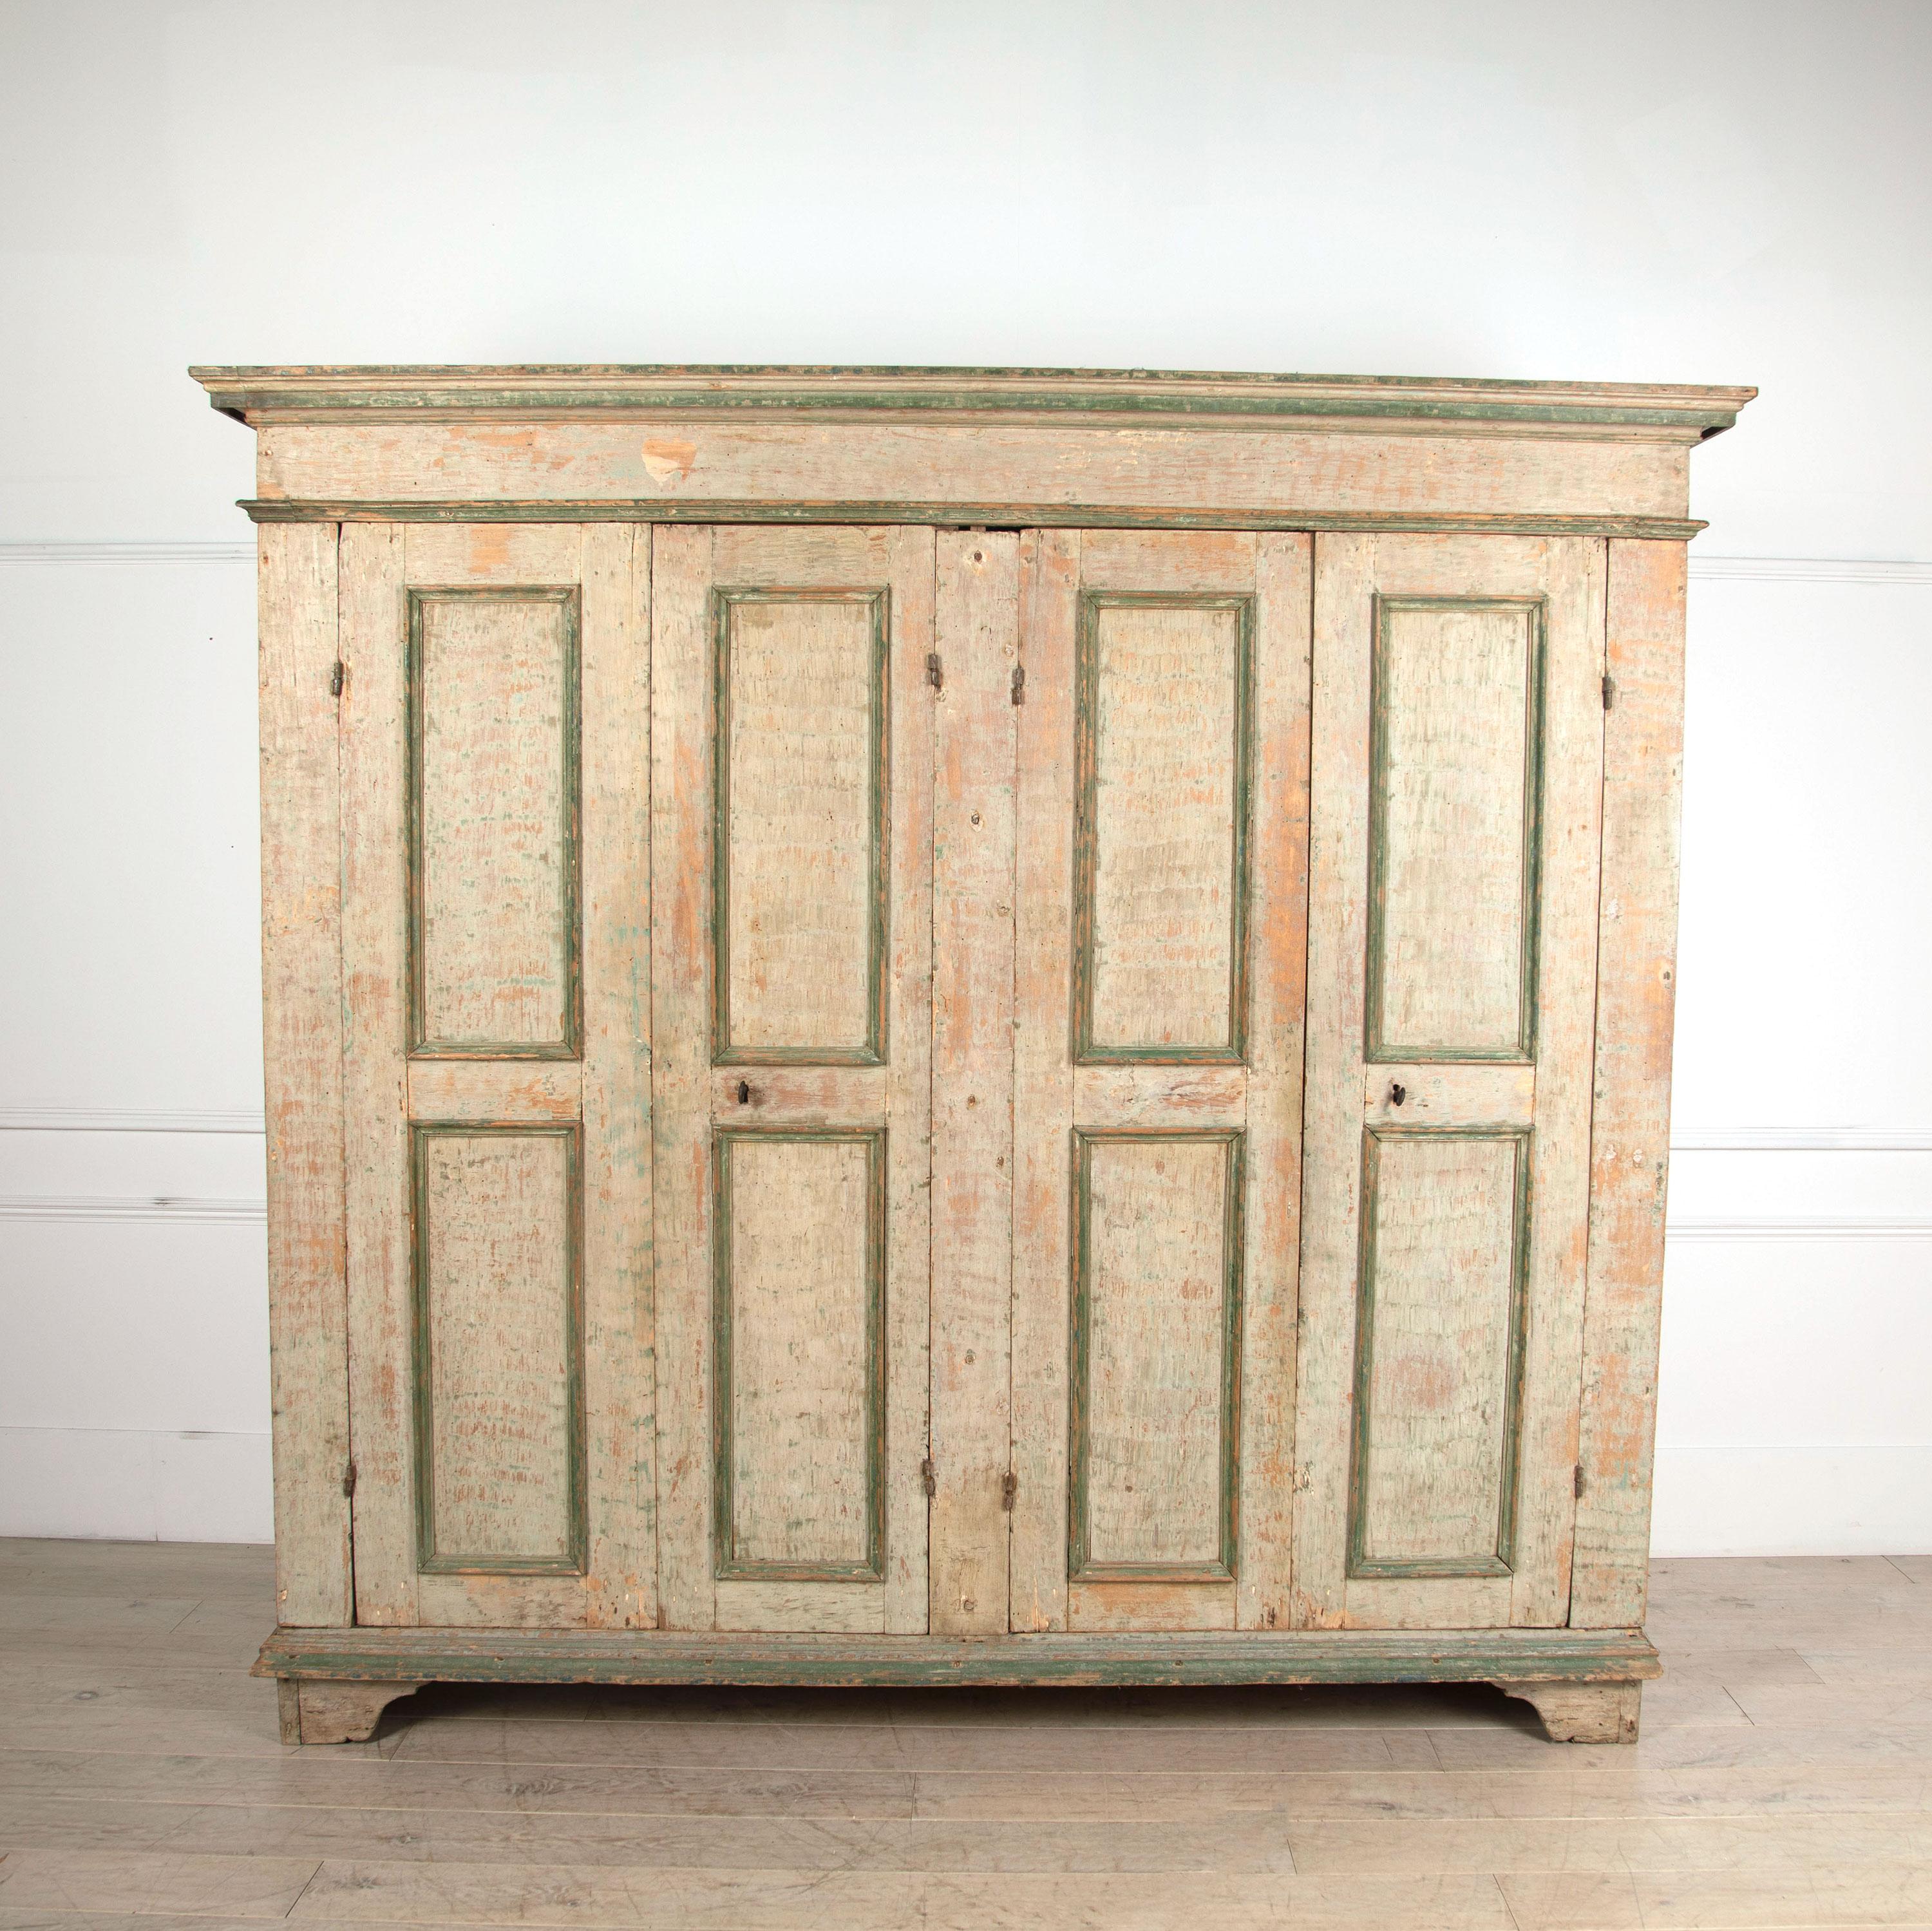 An exceptional Italian four-door cupboard scraped to reveal original paint layers. The piece is in wonderfully original condition with minor losses to the moulding, circa 1800.